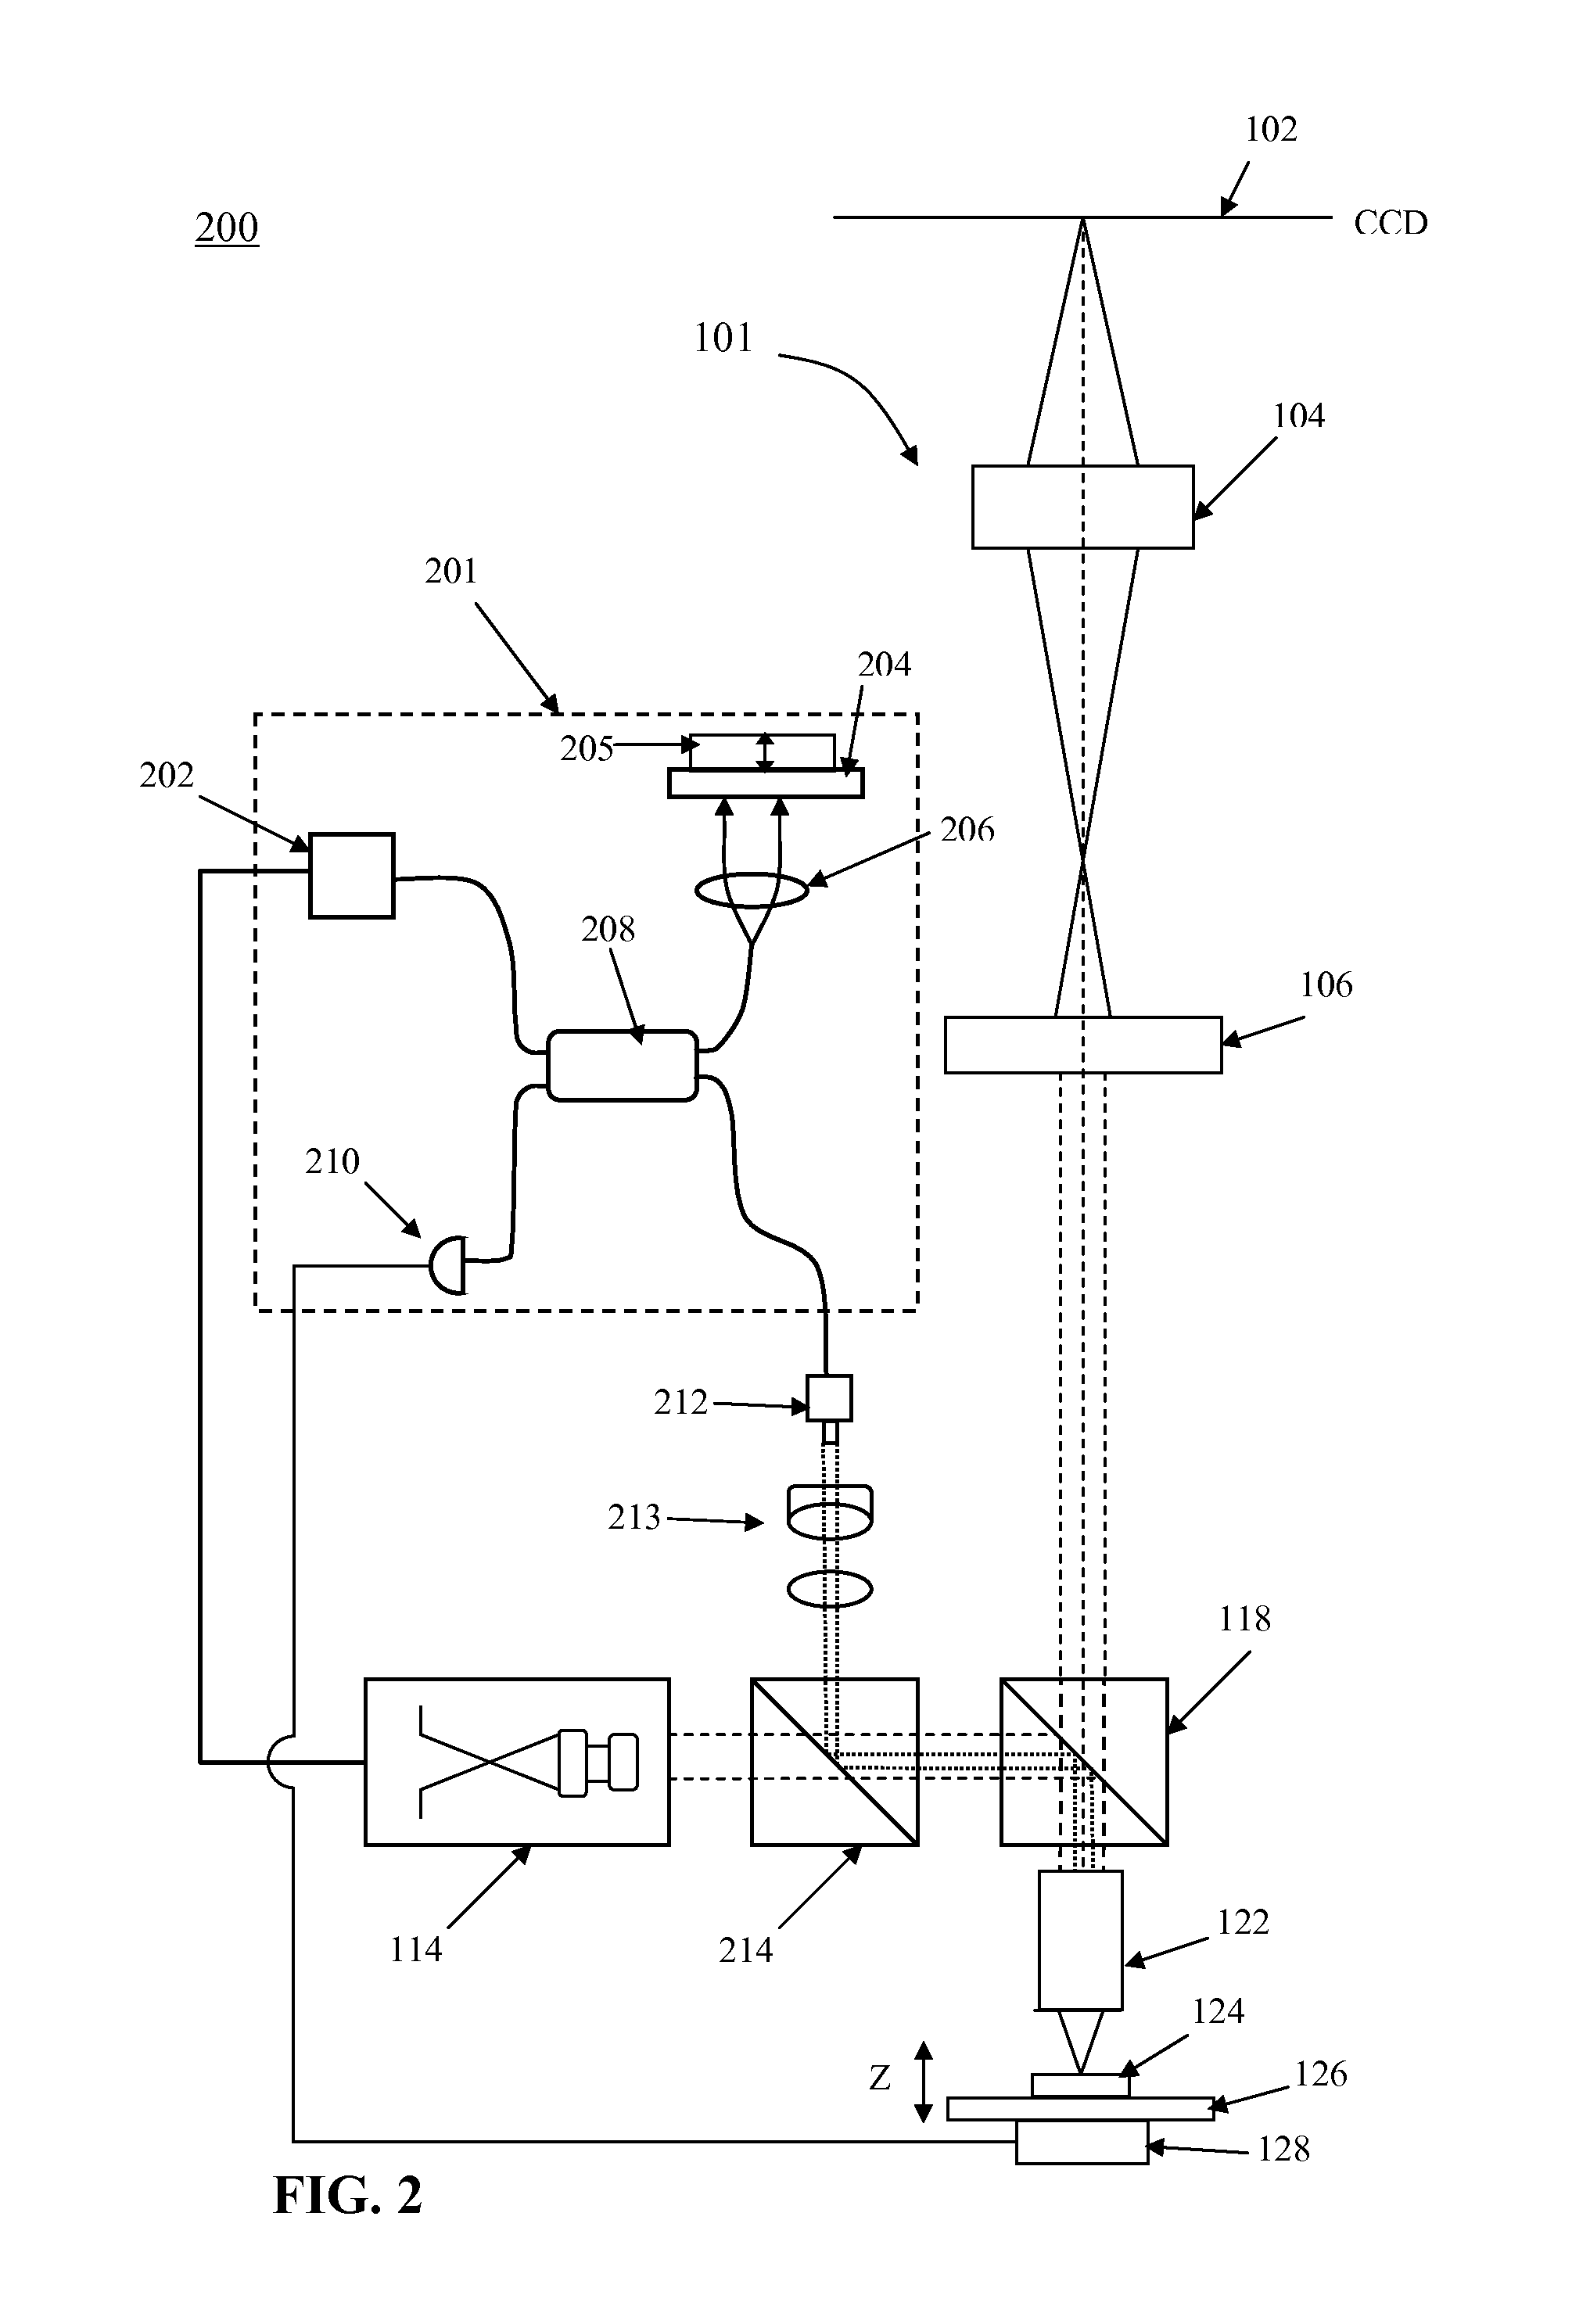 Inspection system with fiber coupled OCT focusing